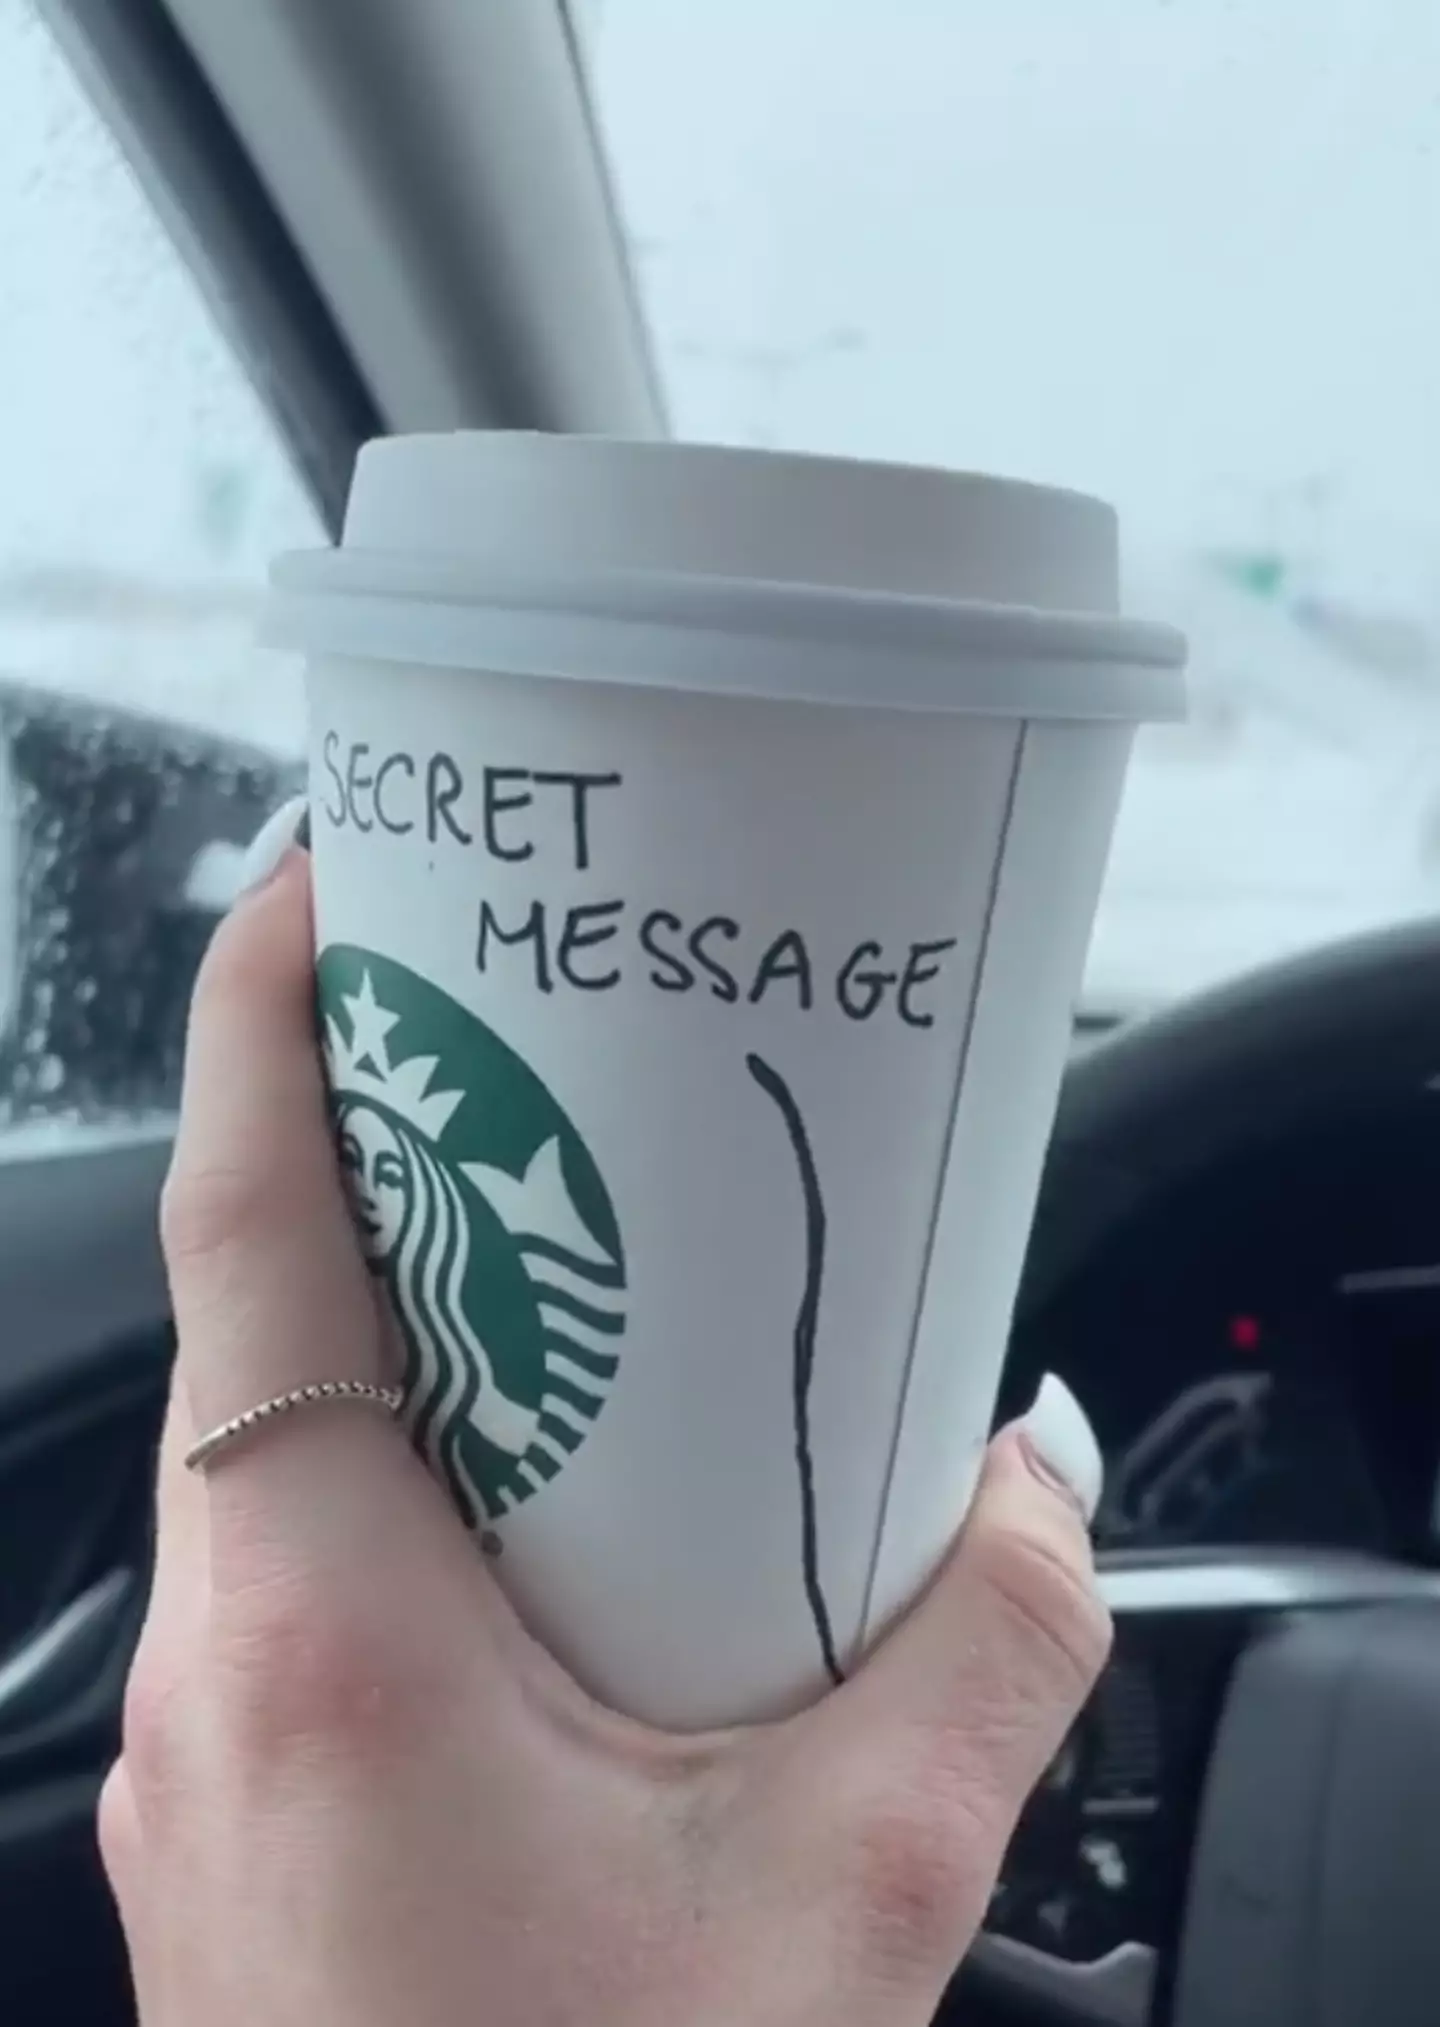 The cup had a 'secret message' on it.